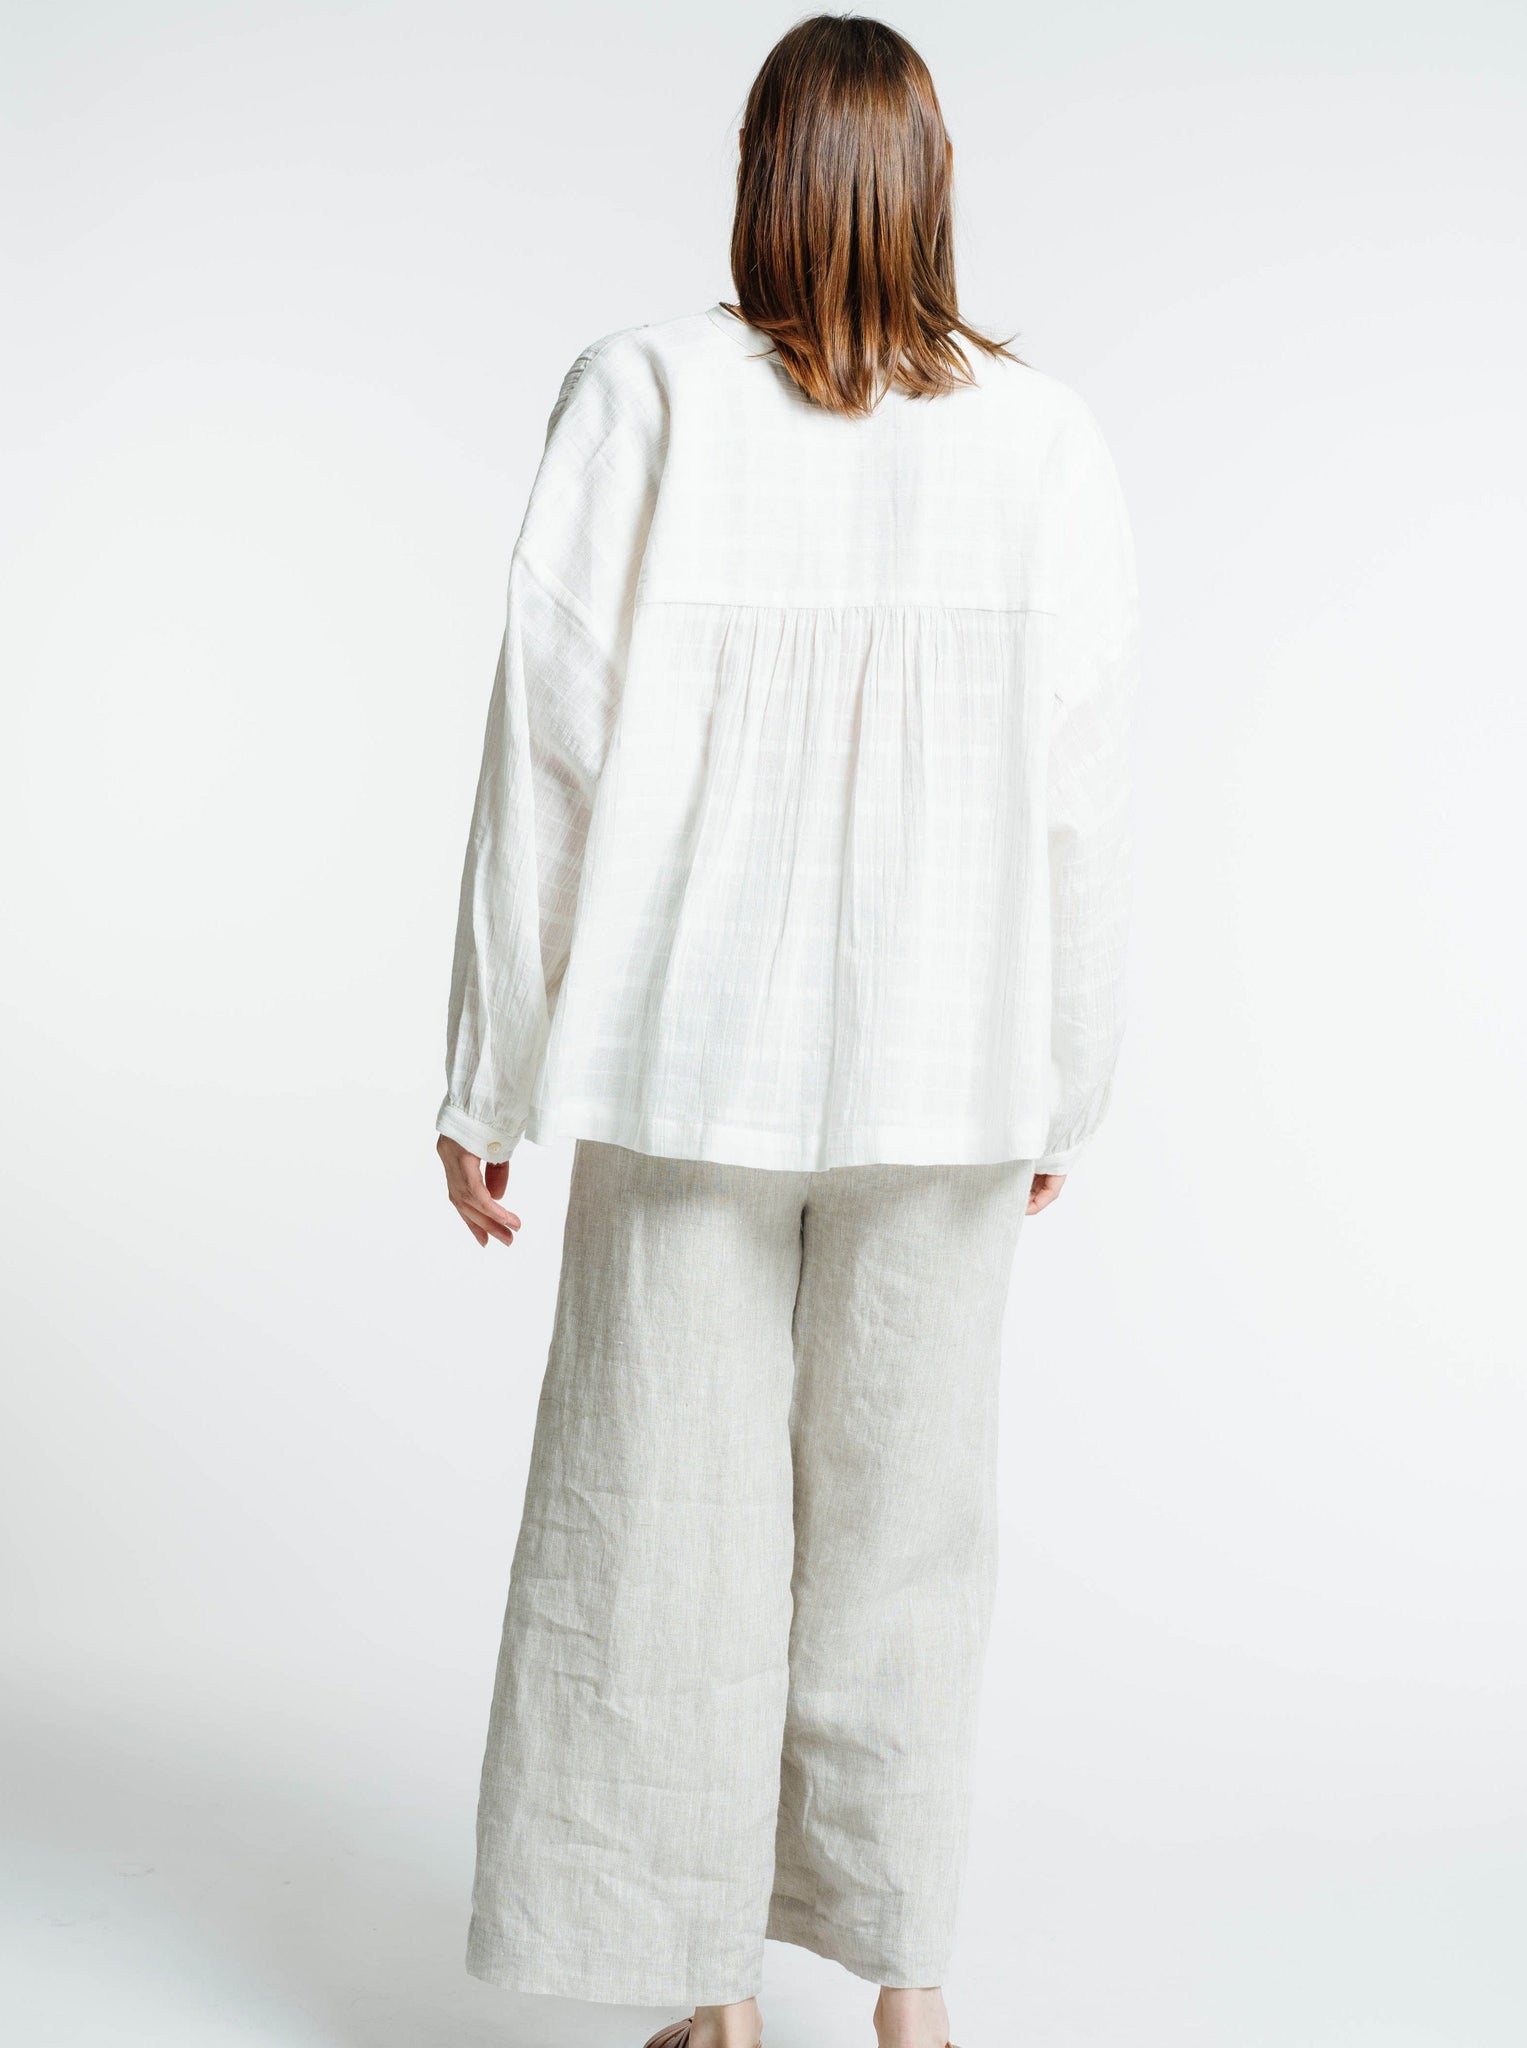 The back view of a woman wearing the Francoise Top - Alabaster Plaid blouse and wide leg pants.